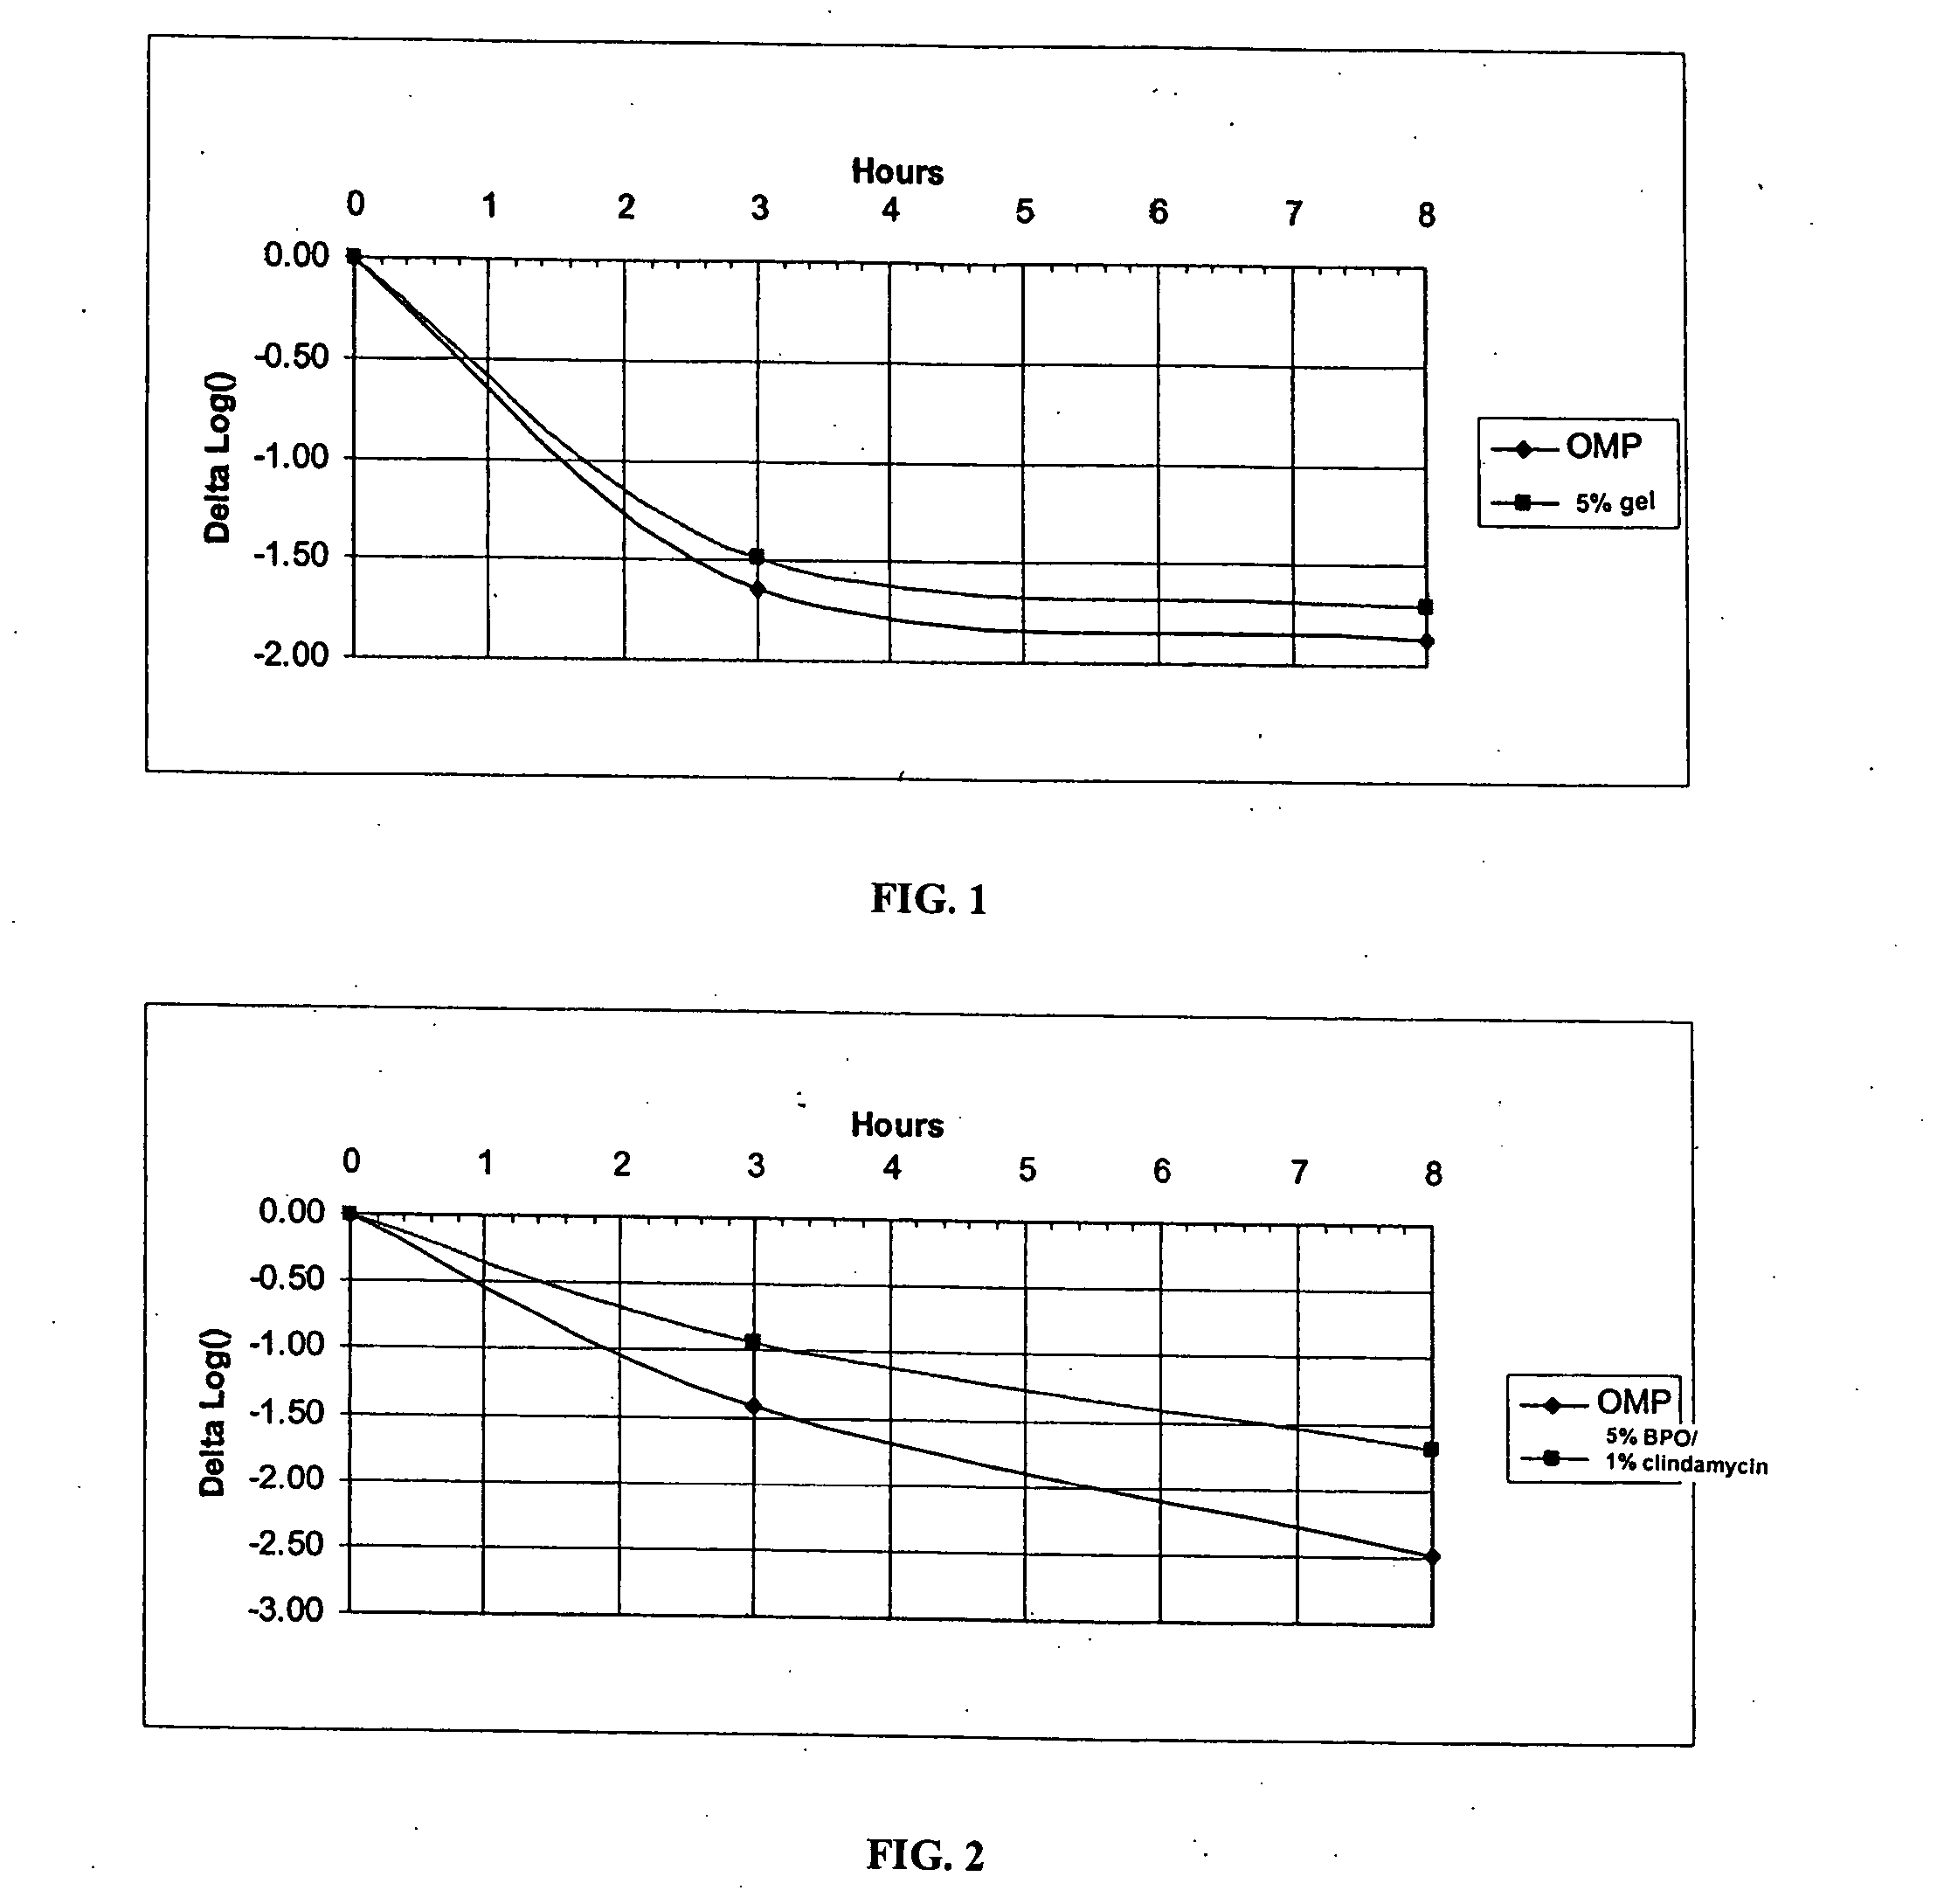 Benzoyl peroxide compositions and methods of use